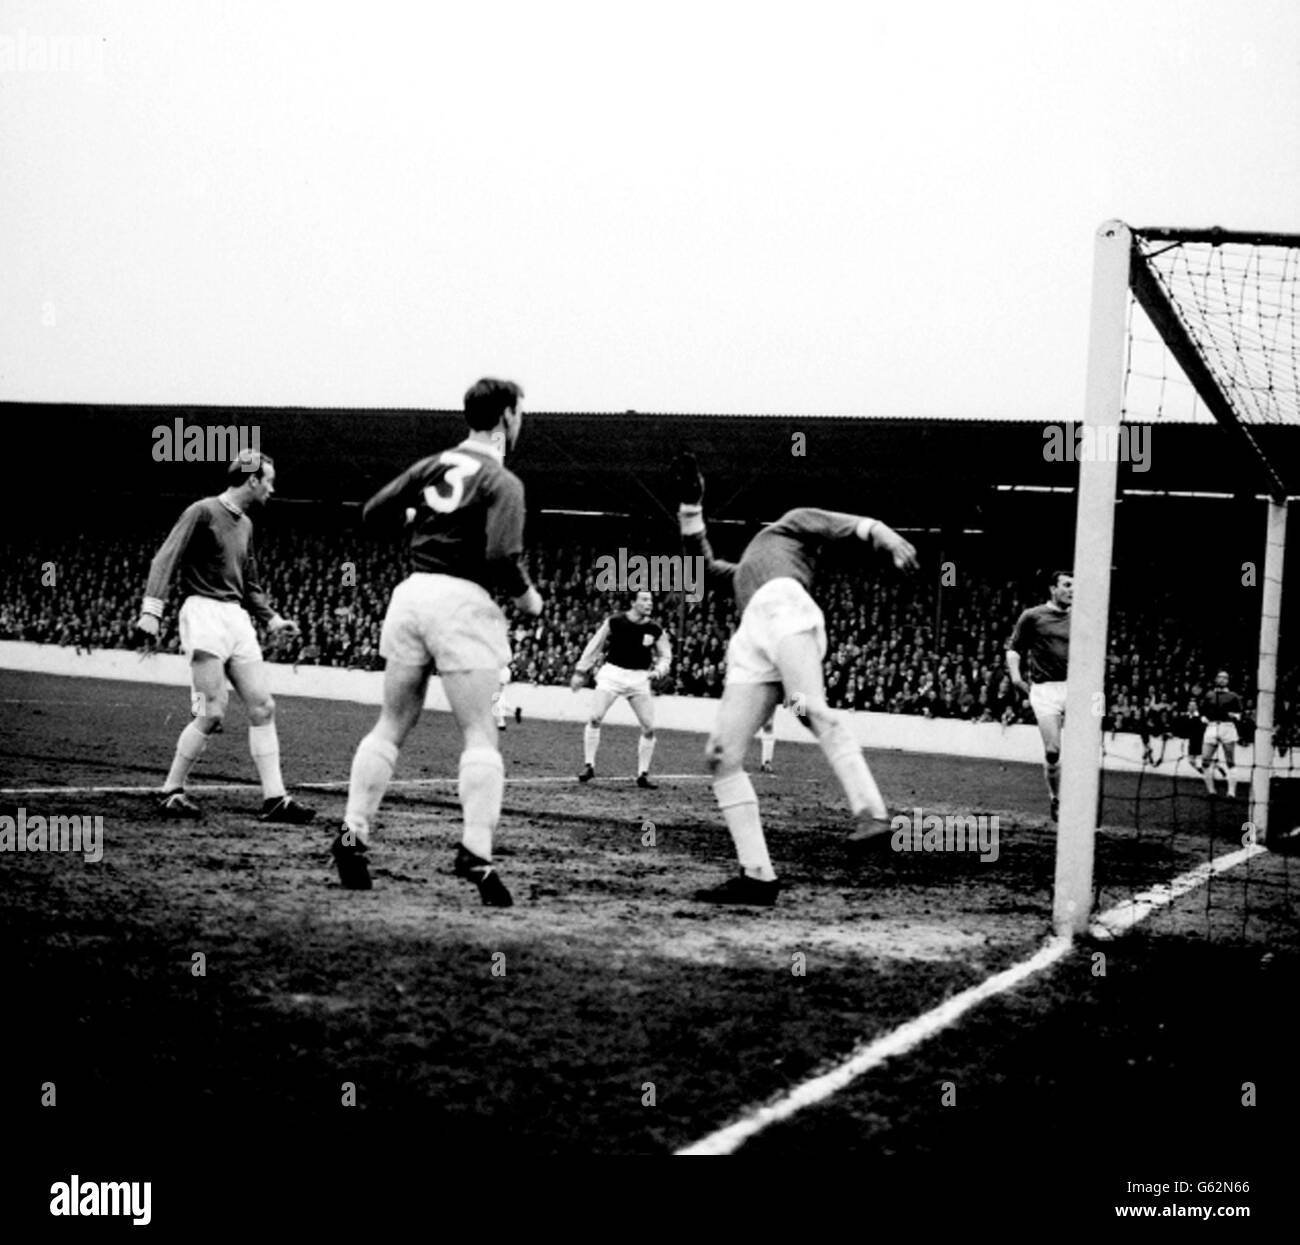 Birmingham City's goalkeeper John Schofield leans over backwards to stop a successful shot from West Ham's Brabrook - not in the picture - during the Division One match at Upton Park. Among the players looking on are No.3 Ray Martin and in the background, West Ham's Joe Byrne. Stock Photo